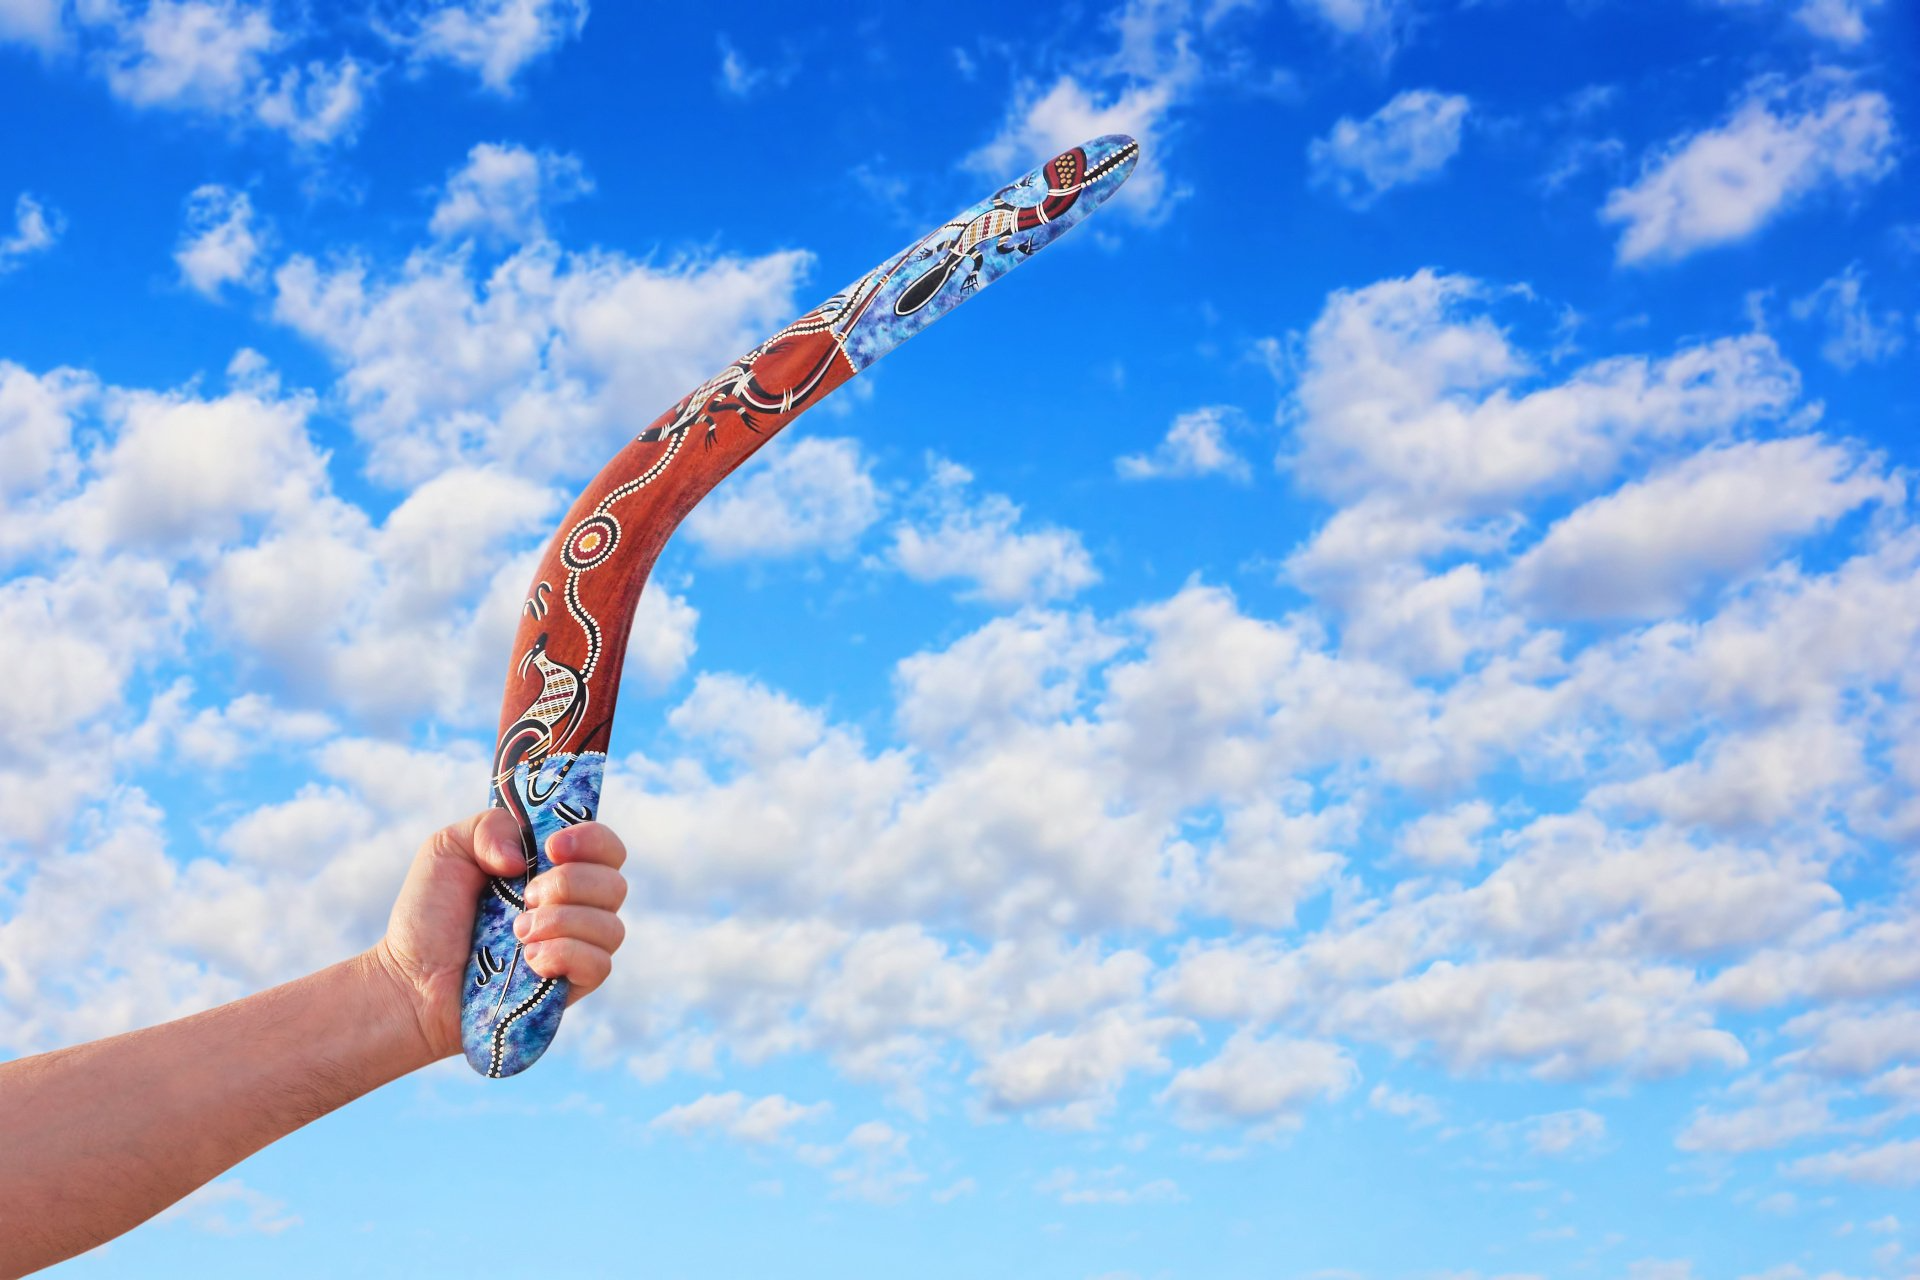 A bright blue sky dotted with clouds in the background, a hand holding a boomerang in the foreground